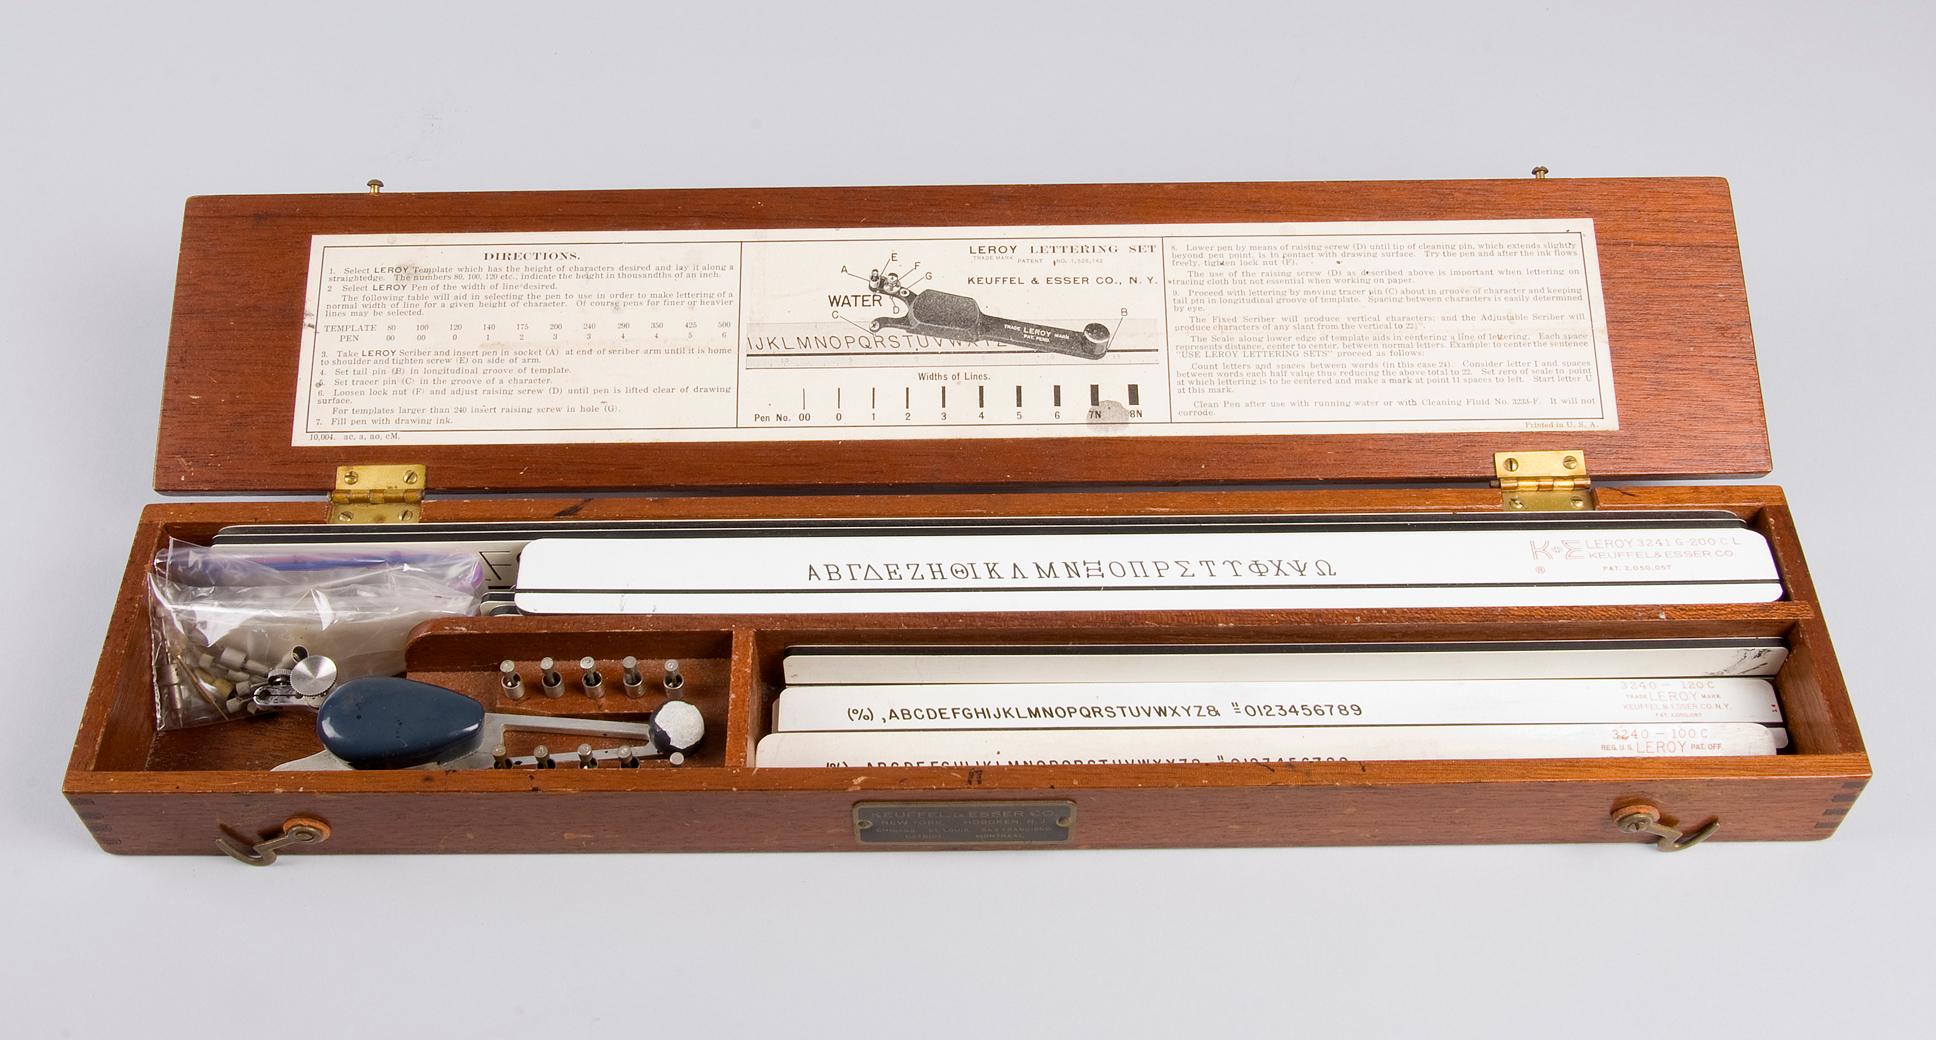 George Steiszkal 叶开 on LinkedIn: The Leroy Lettering Drafting tool is a  mechanical lettering set that was…